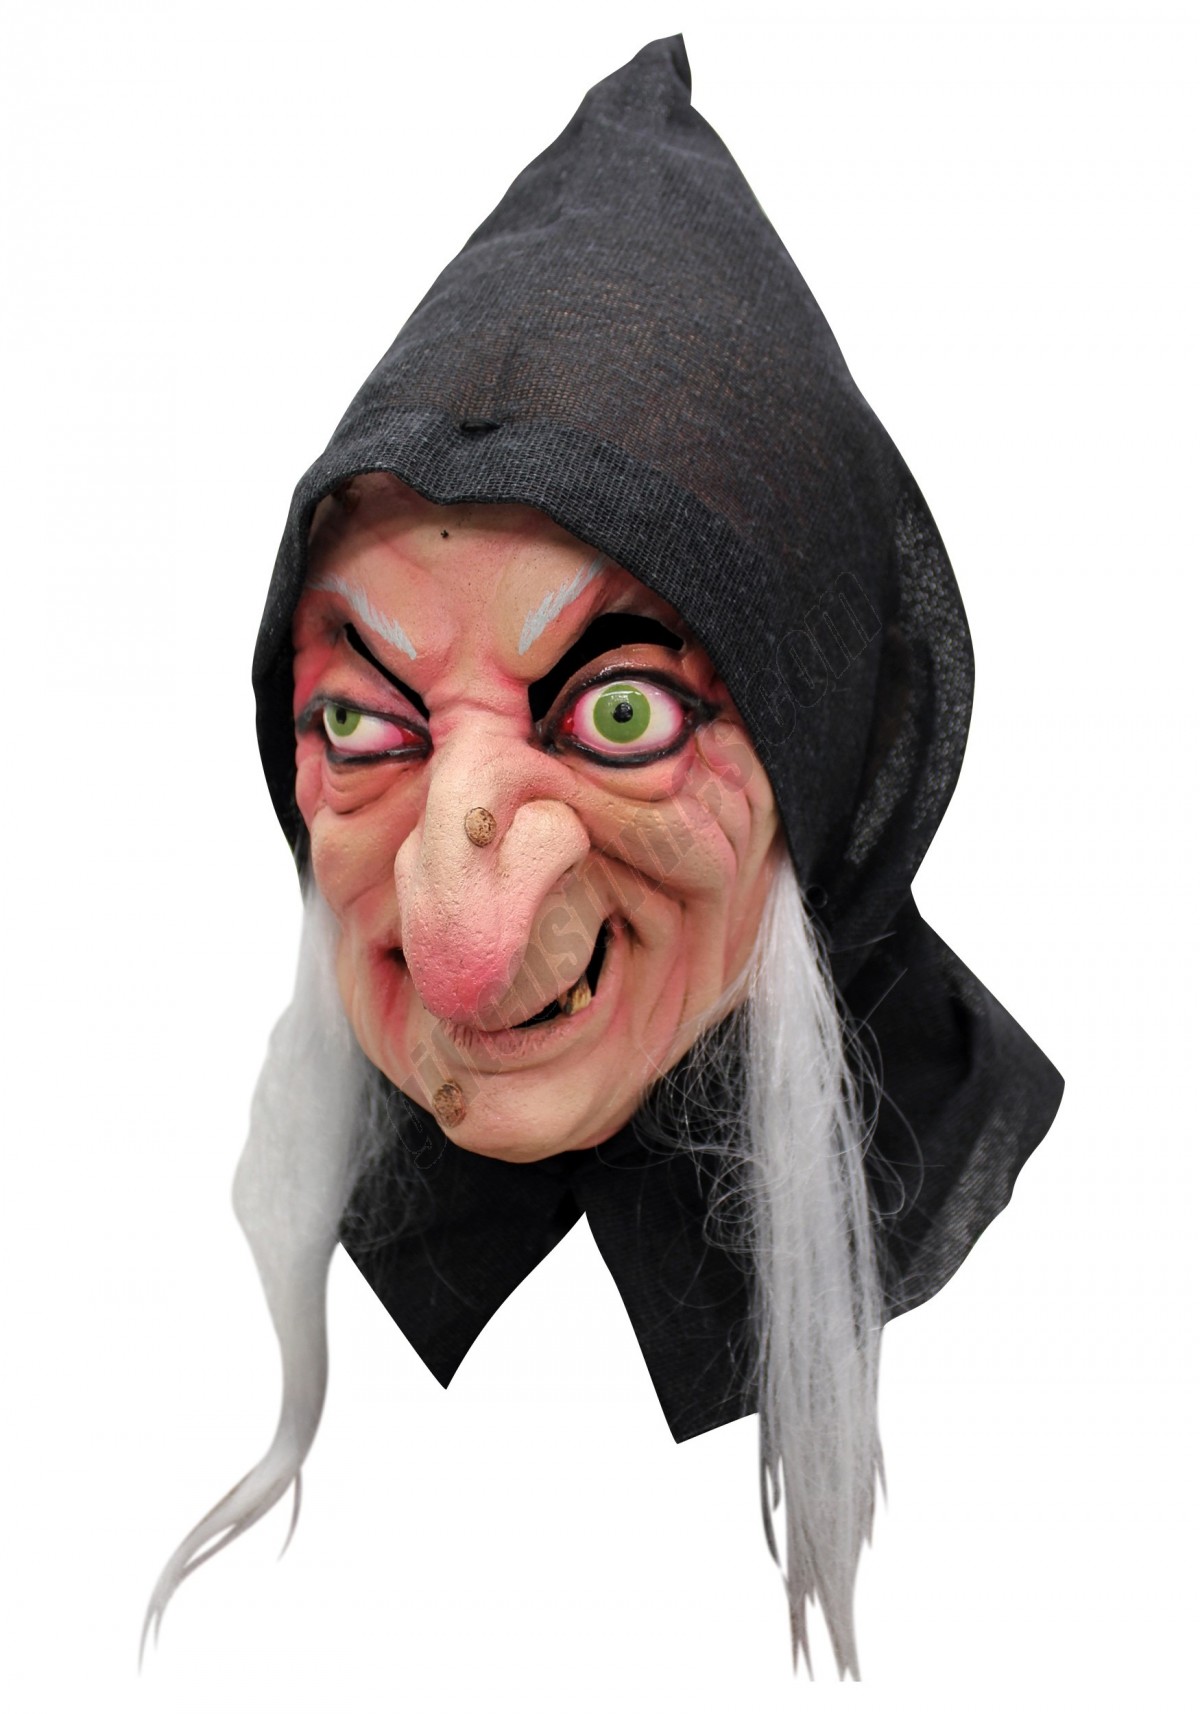 Snow White - Old Hag Witch Mask Promotions - -0